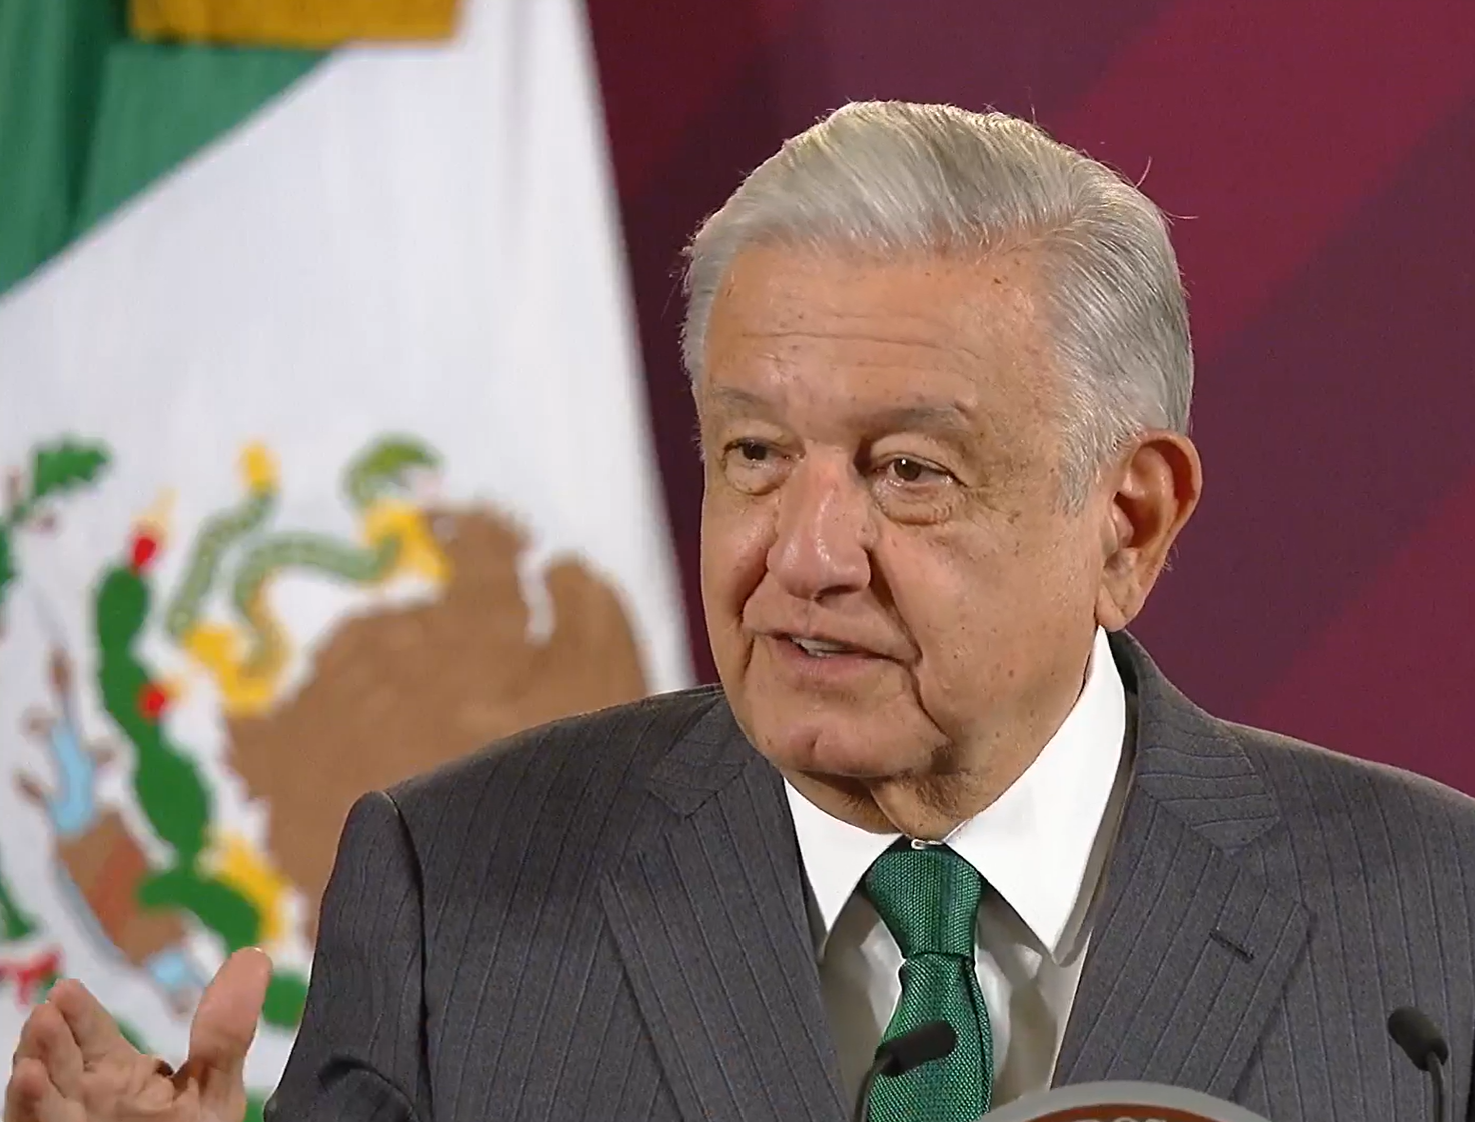 President AMLO addresses the nation with updates on fuel prices, Mayan Train progress, and hurricane relief efforts.